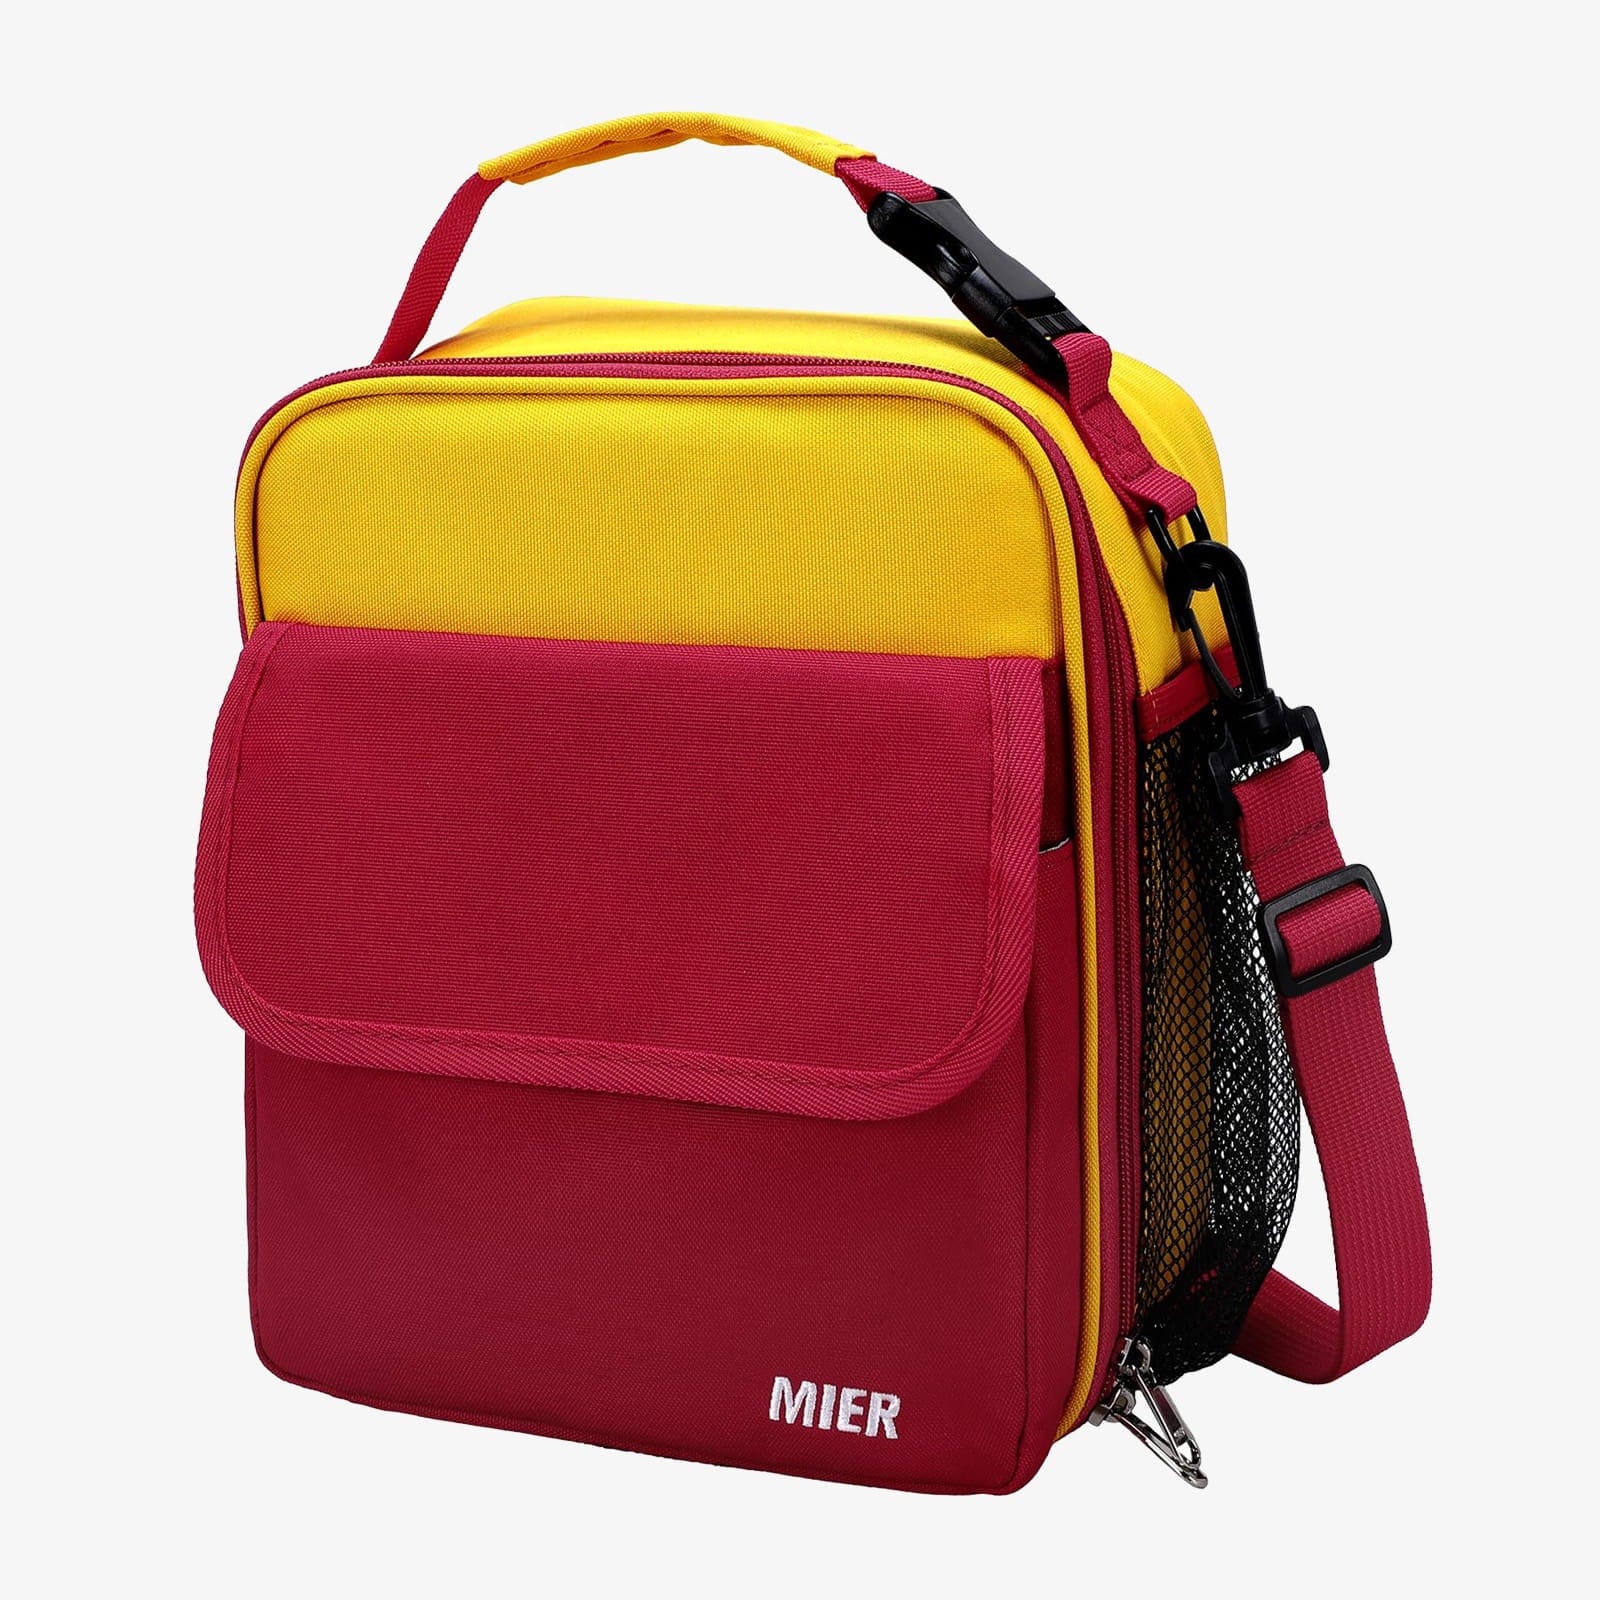 MIER Insulated Lunchbox Bag Totes for Kids, Yellow Red